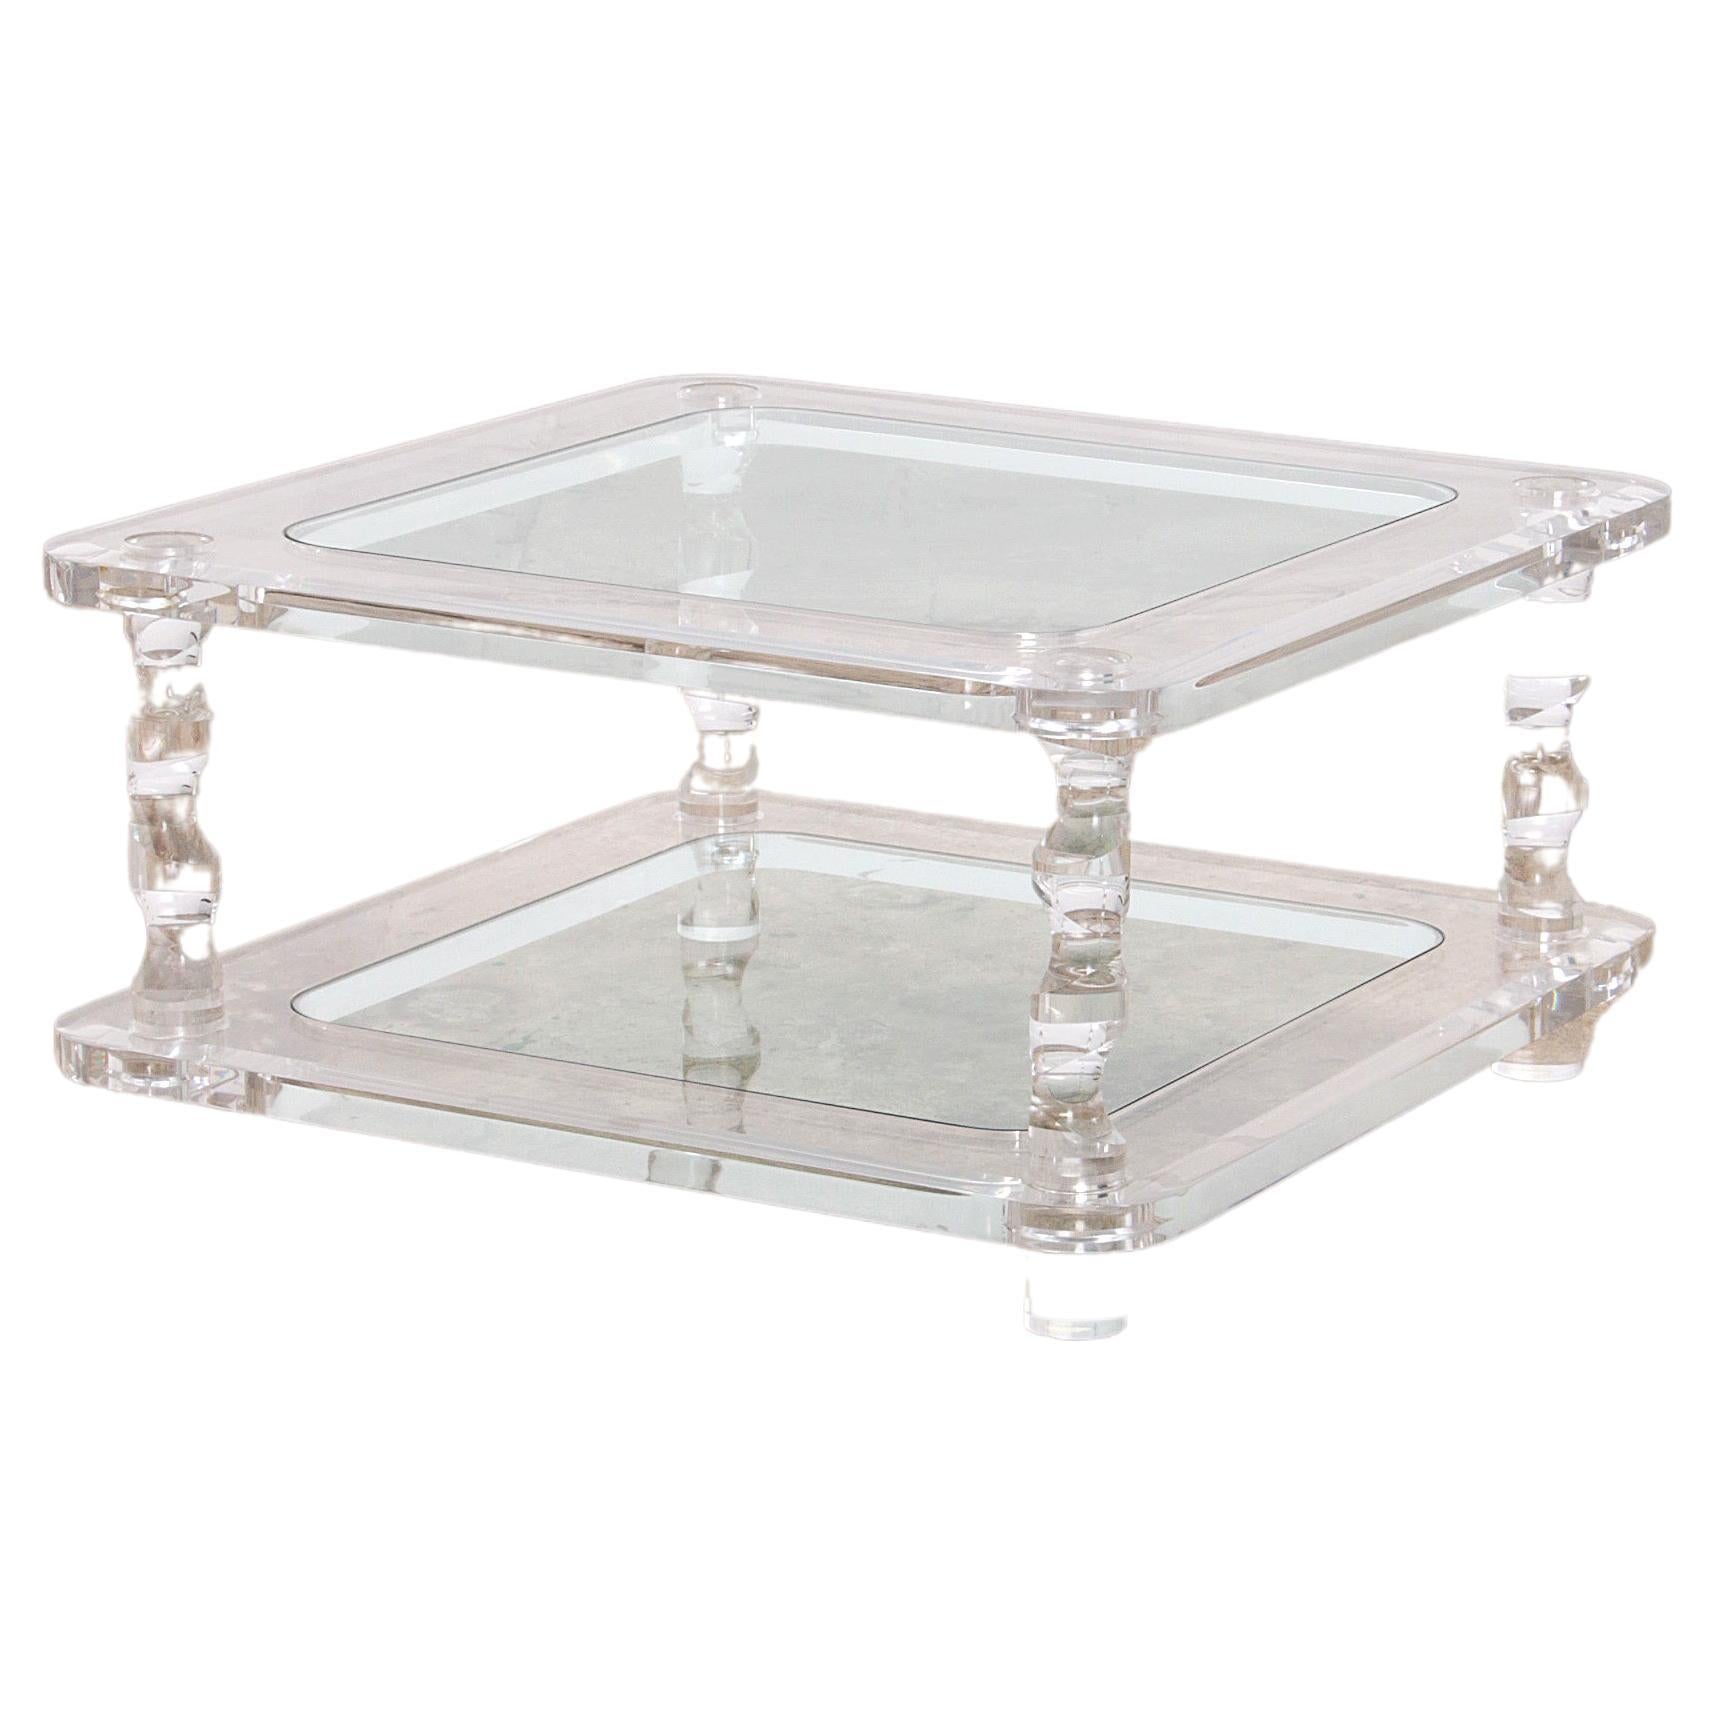 French Coffee Table Lucite and Glass Maison Romeo, 1970s For Sale